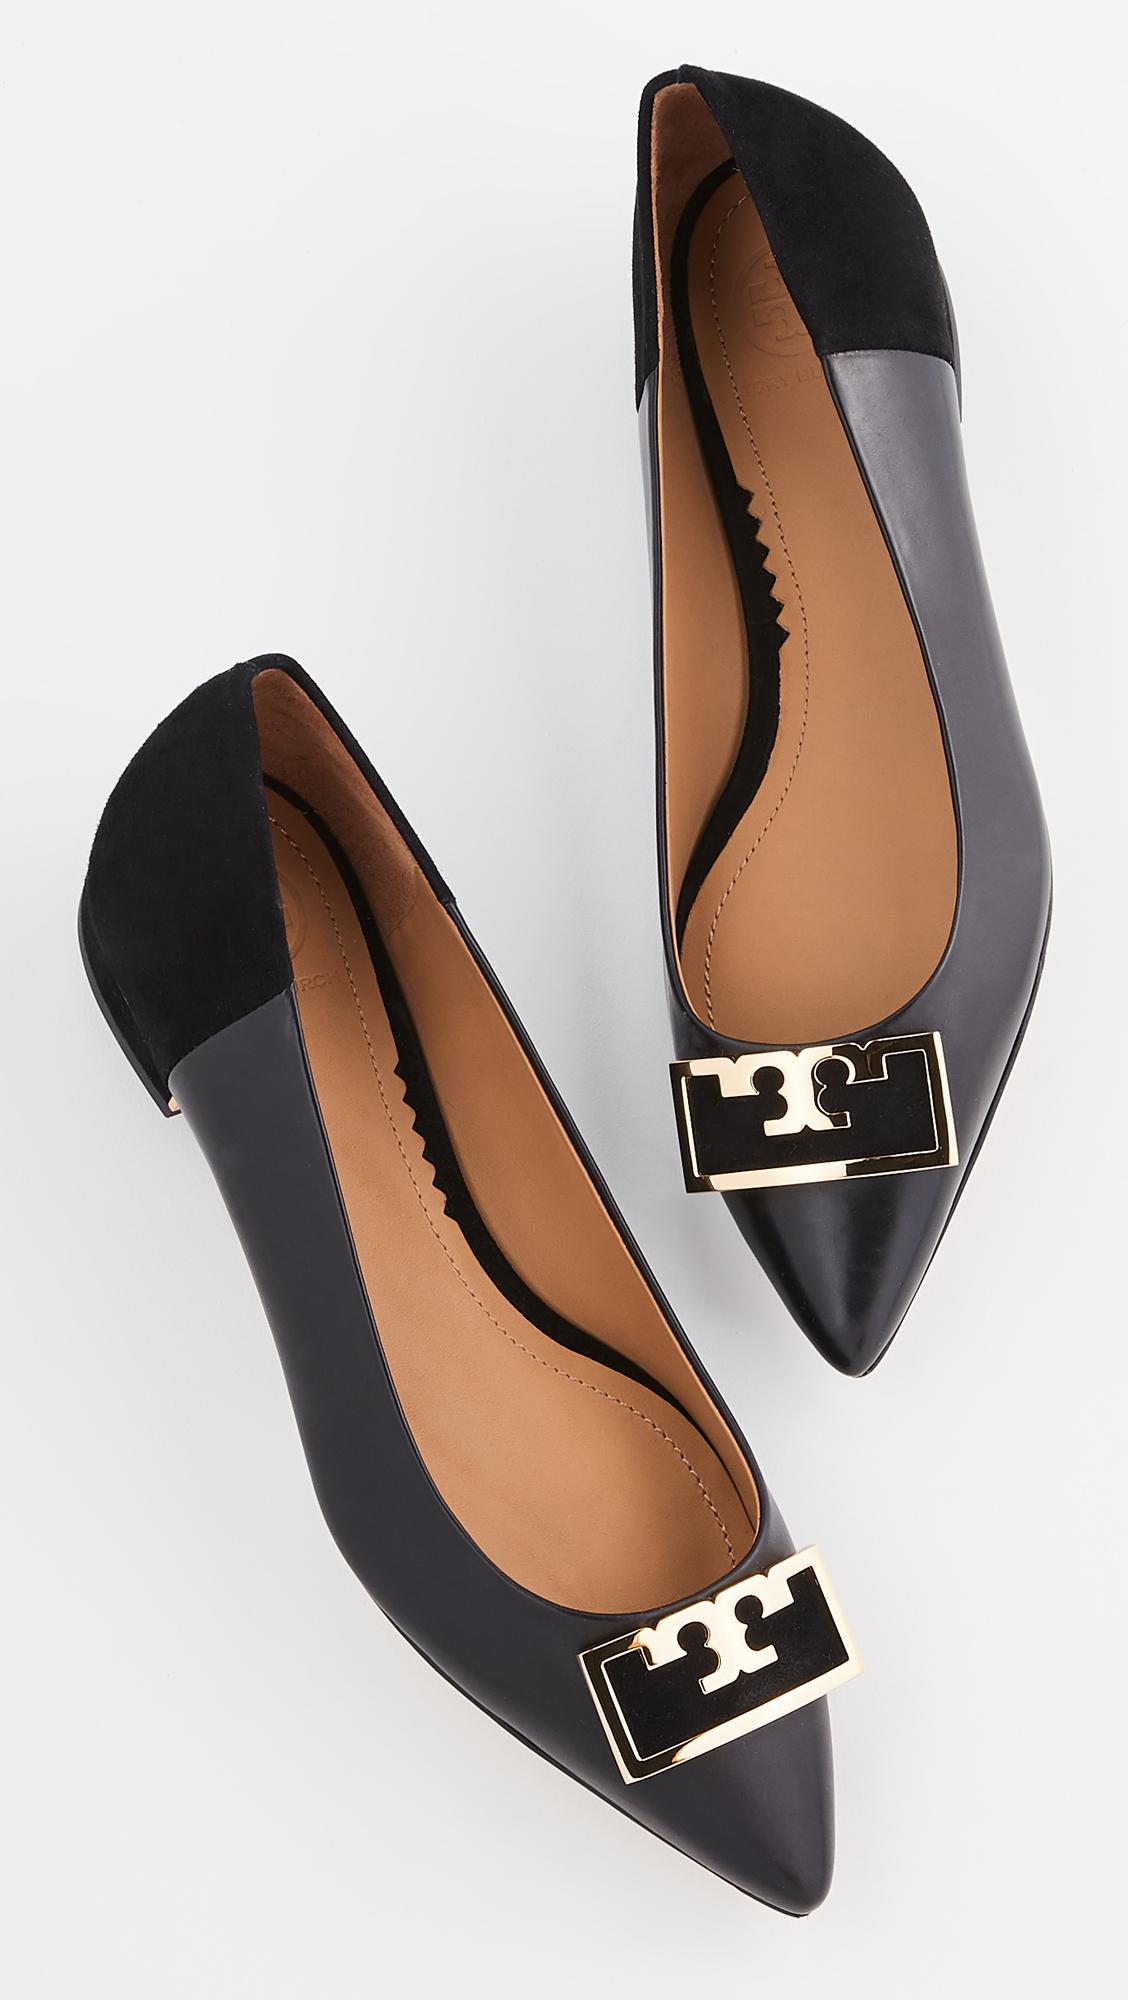 tory burch pointed toe flats